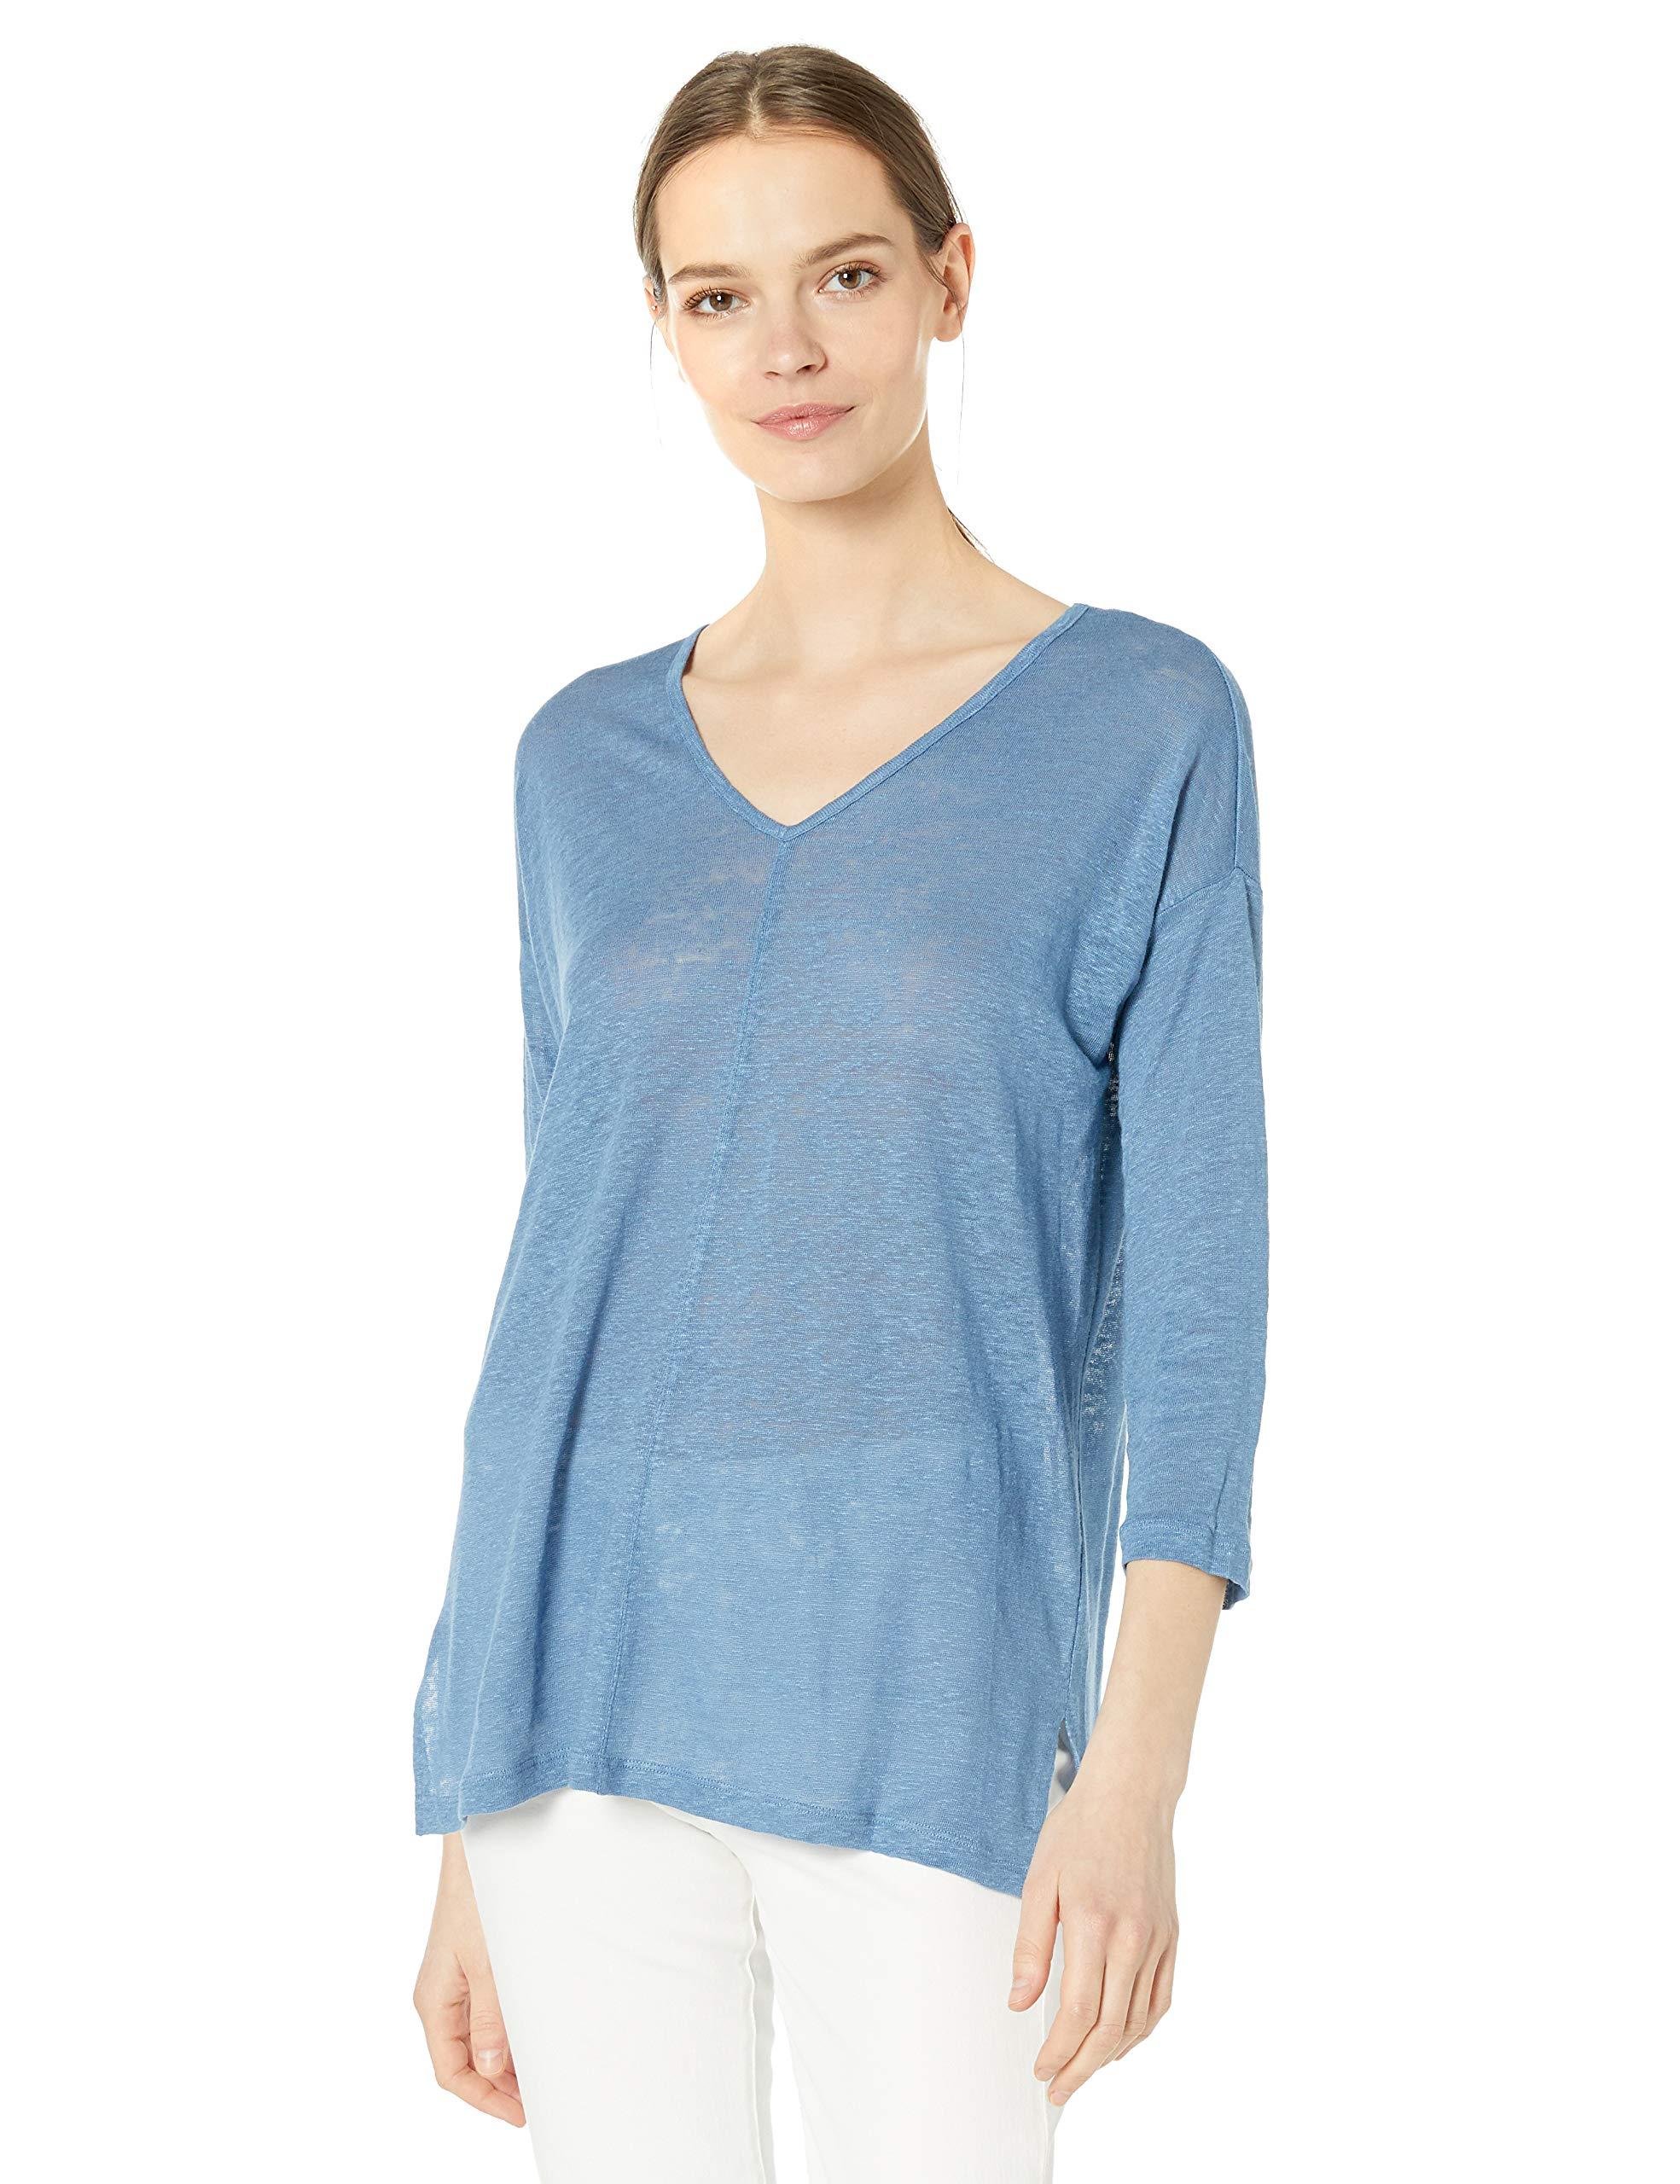 Vince Camuto Front Seam Linen Top in Blue - Lyst